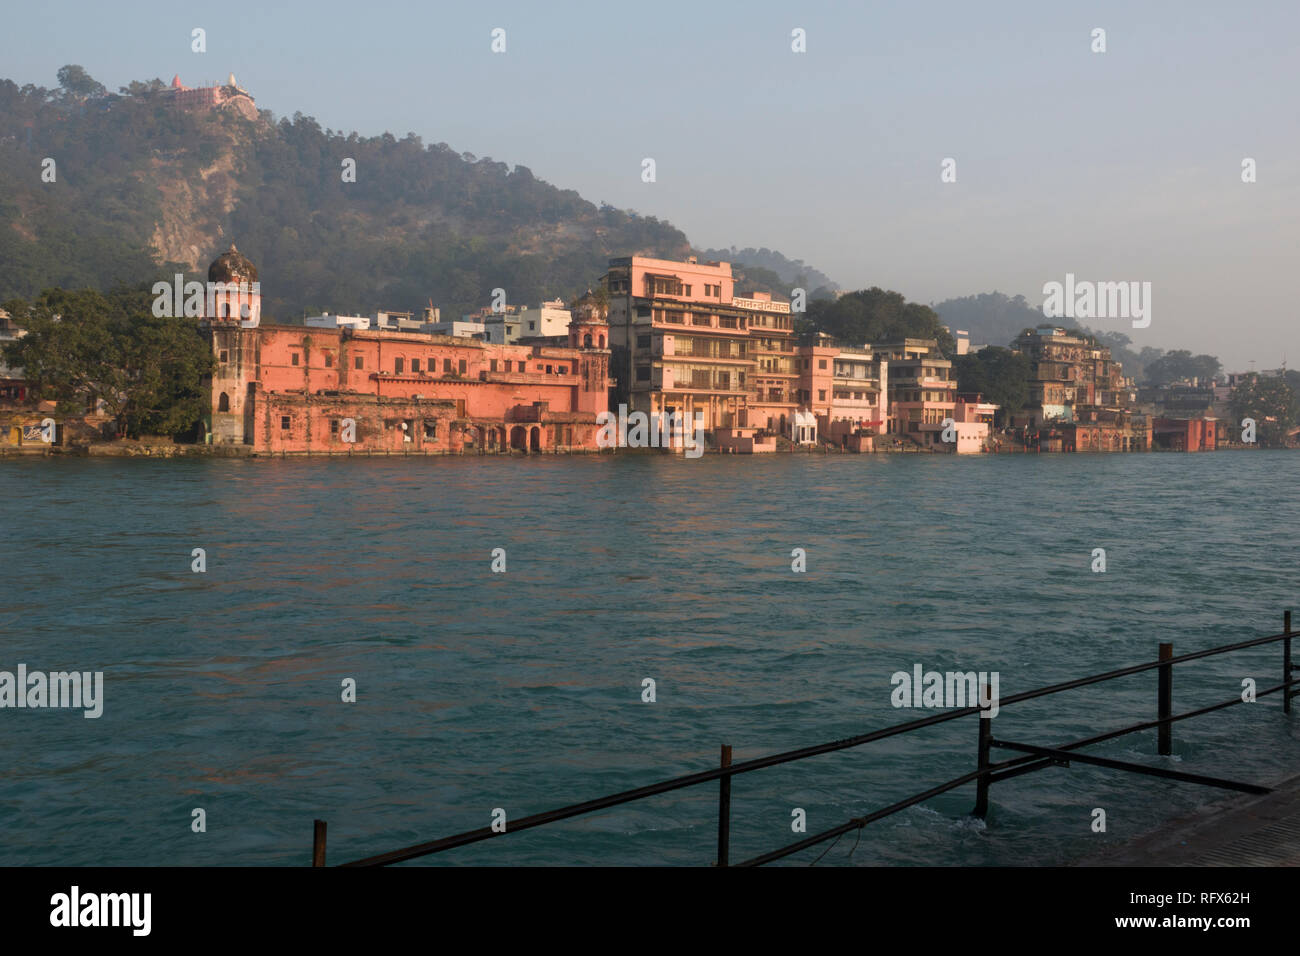 Riverfront buildings on the Ganges River at Haridwar, Uttarakhand, India Stock Photo